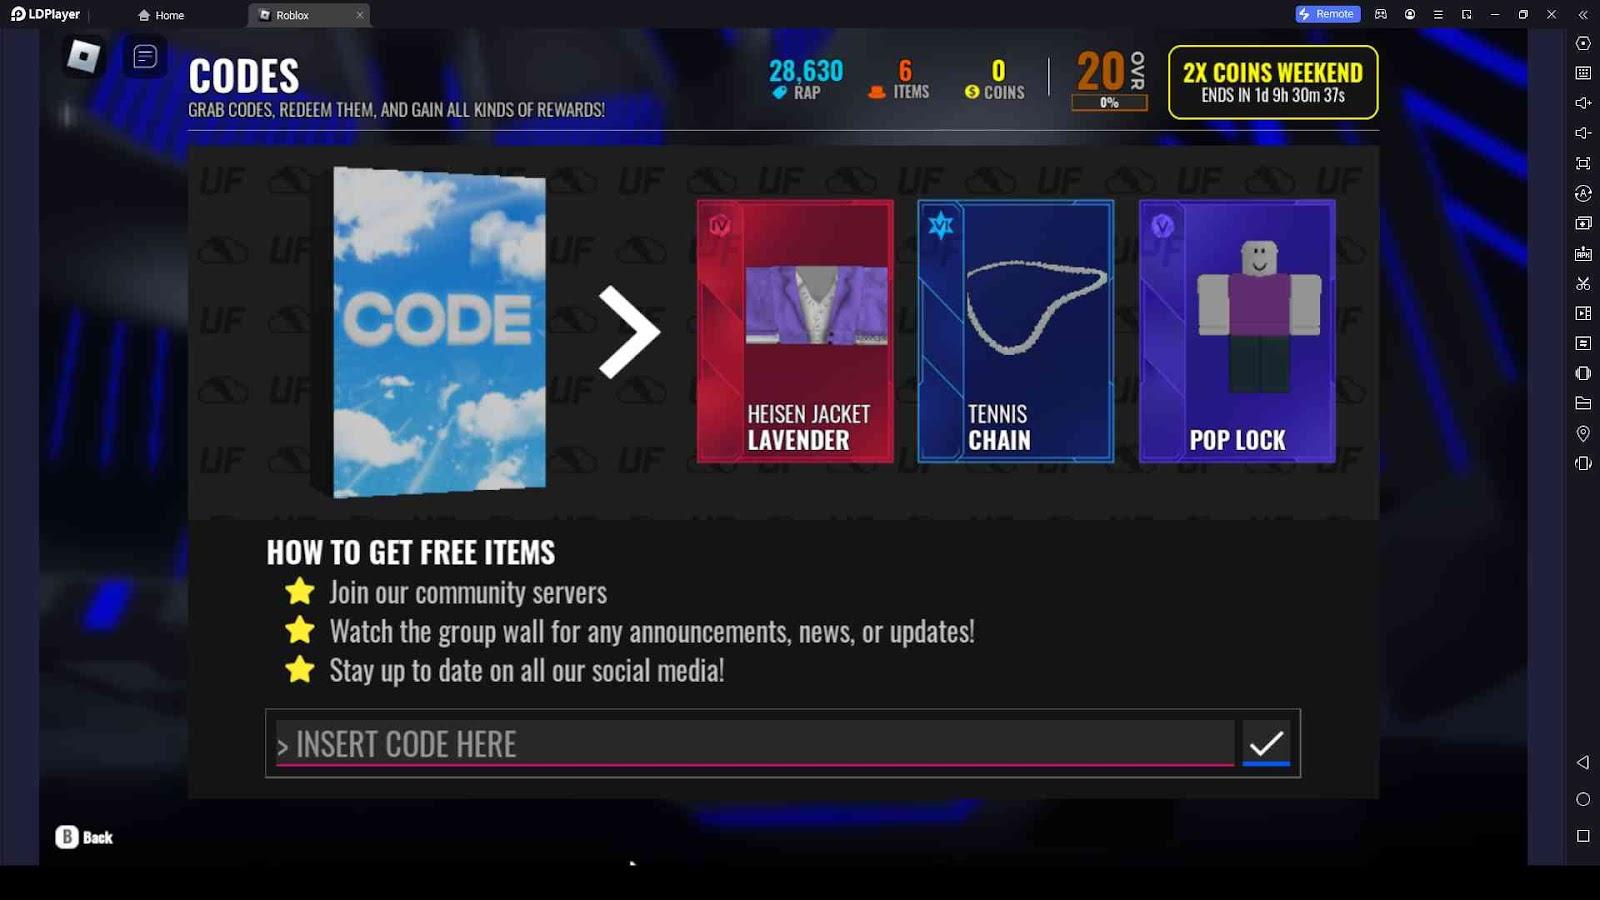 Roblox Ultimate Football Codes for November 2023